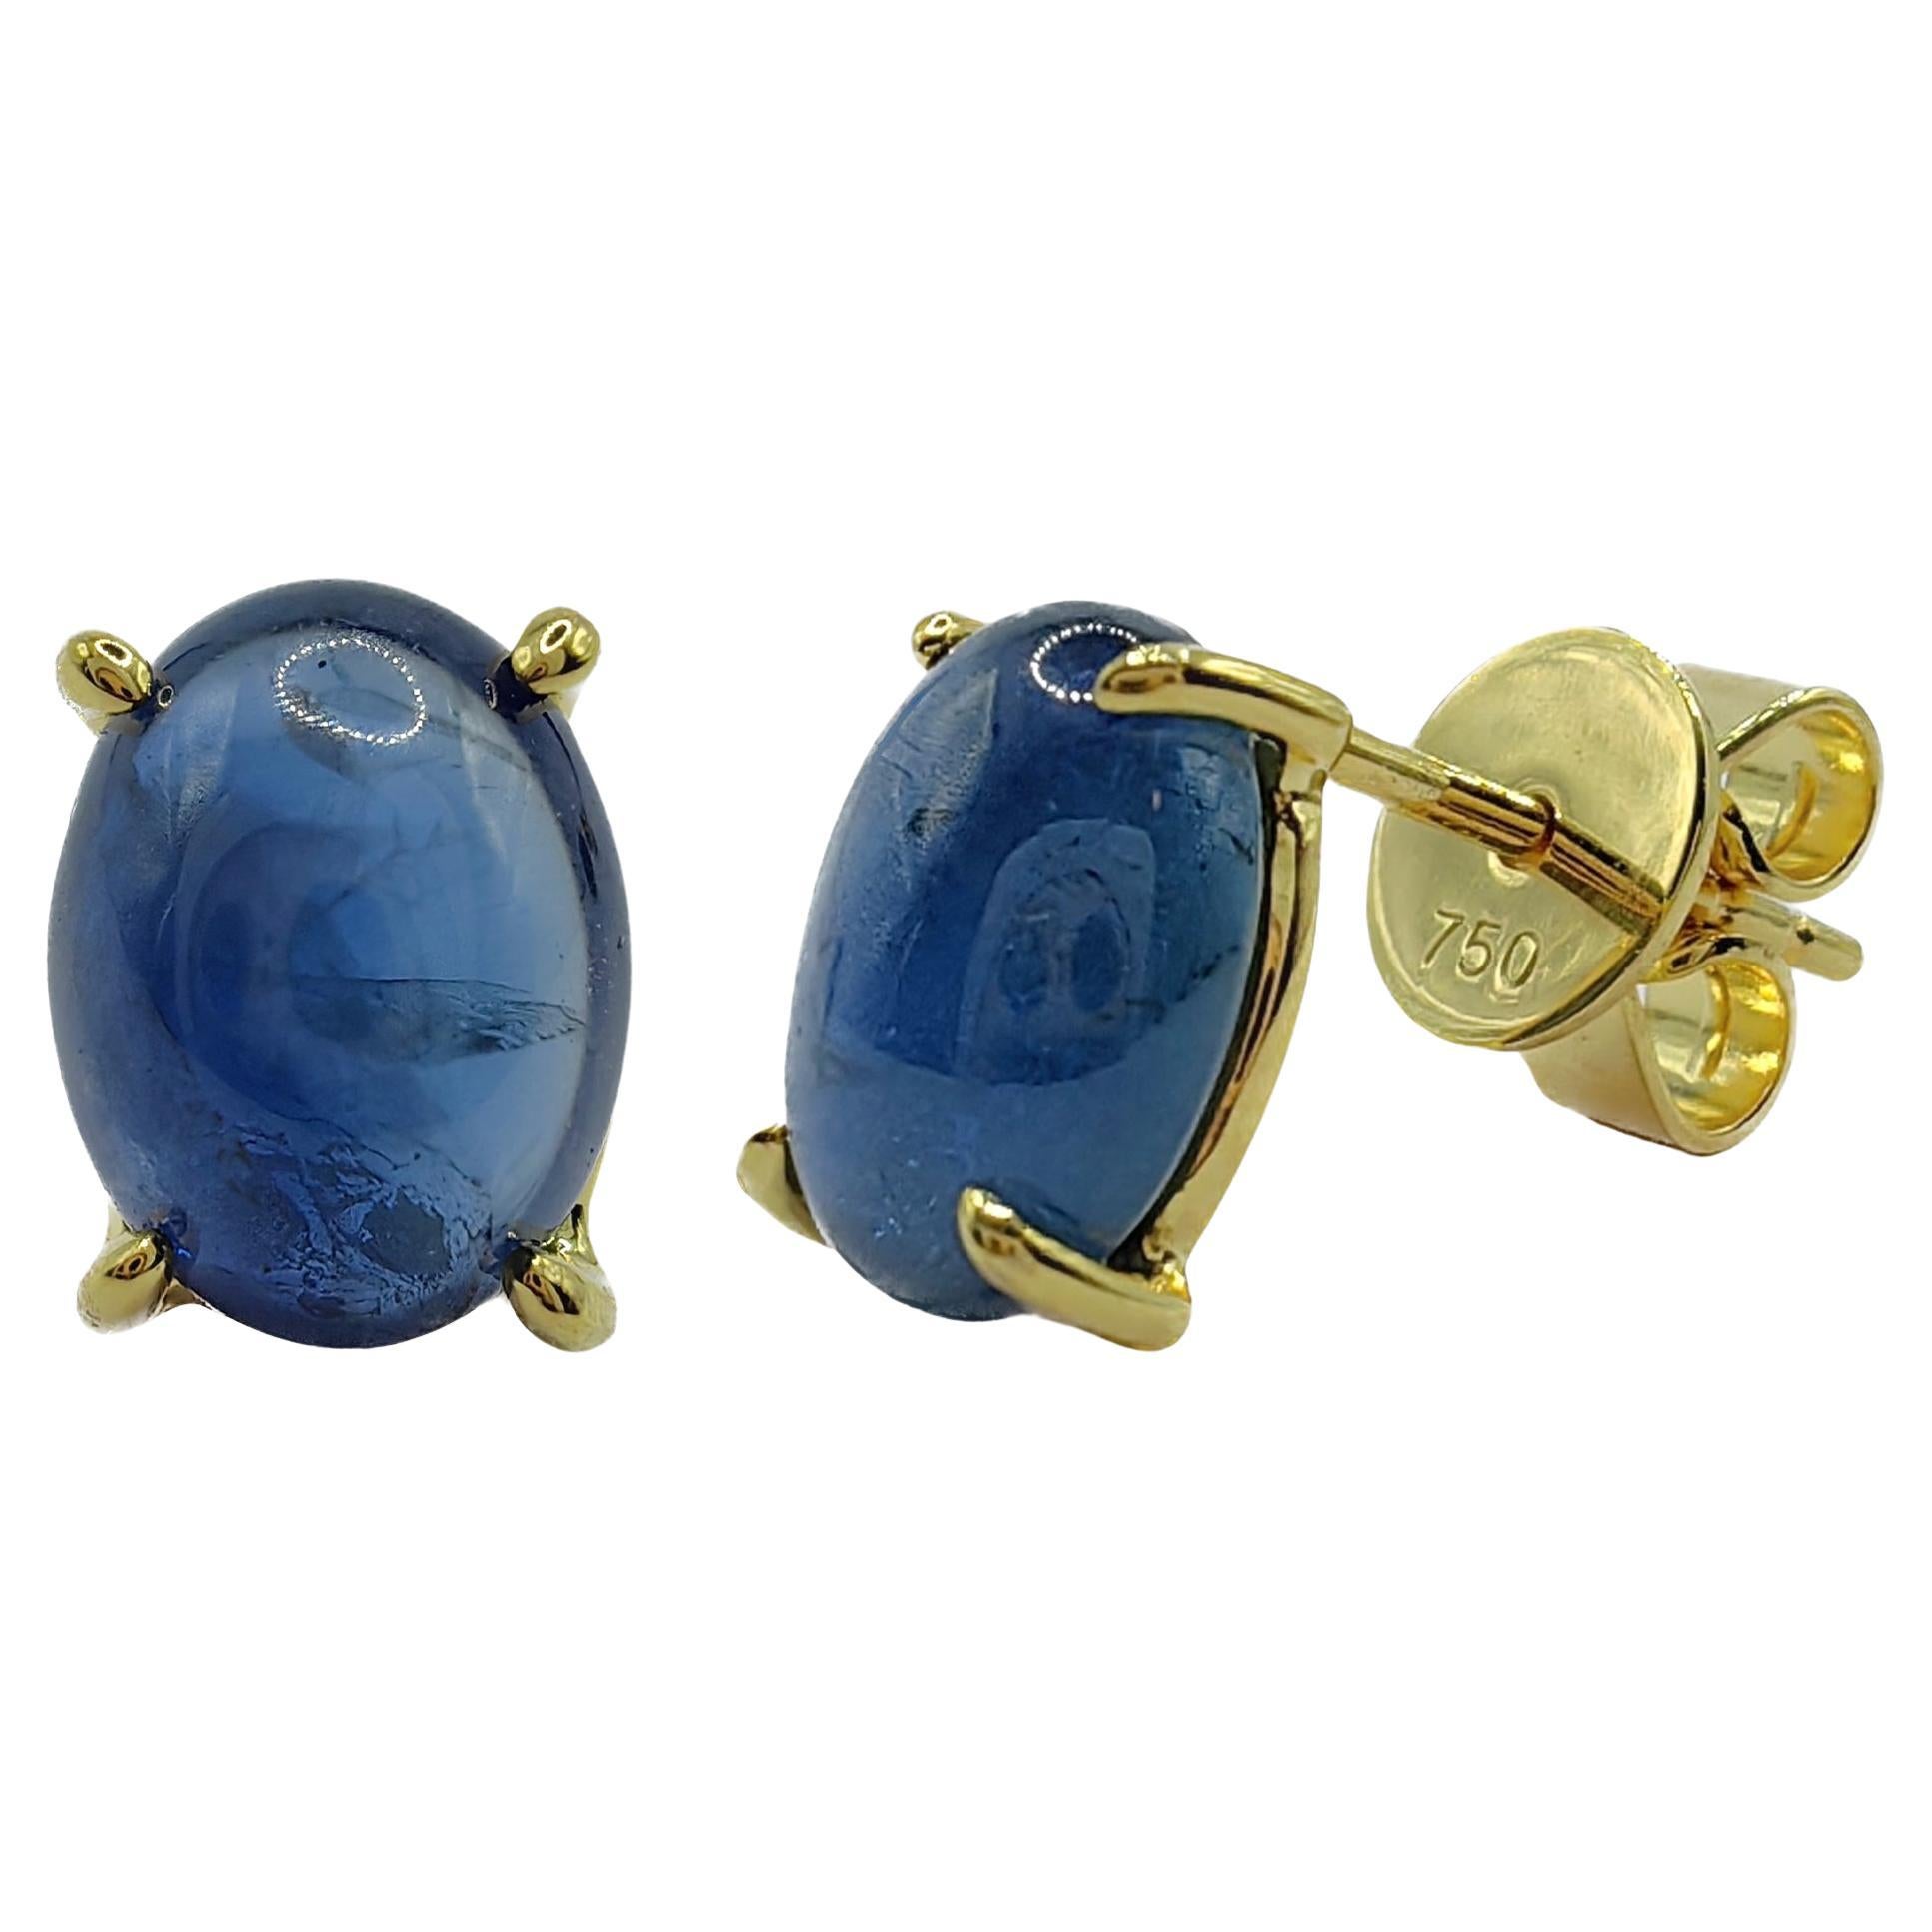 Matched 3.86 Carat 8x6mm Cabochon Blue Sapphire 18K Yellow Gold Stud Earrings